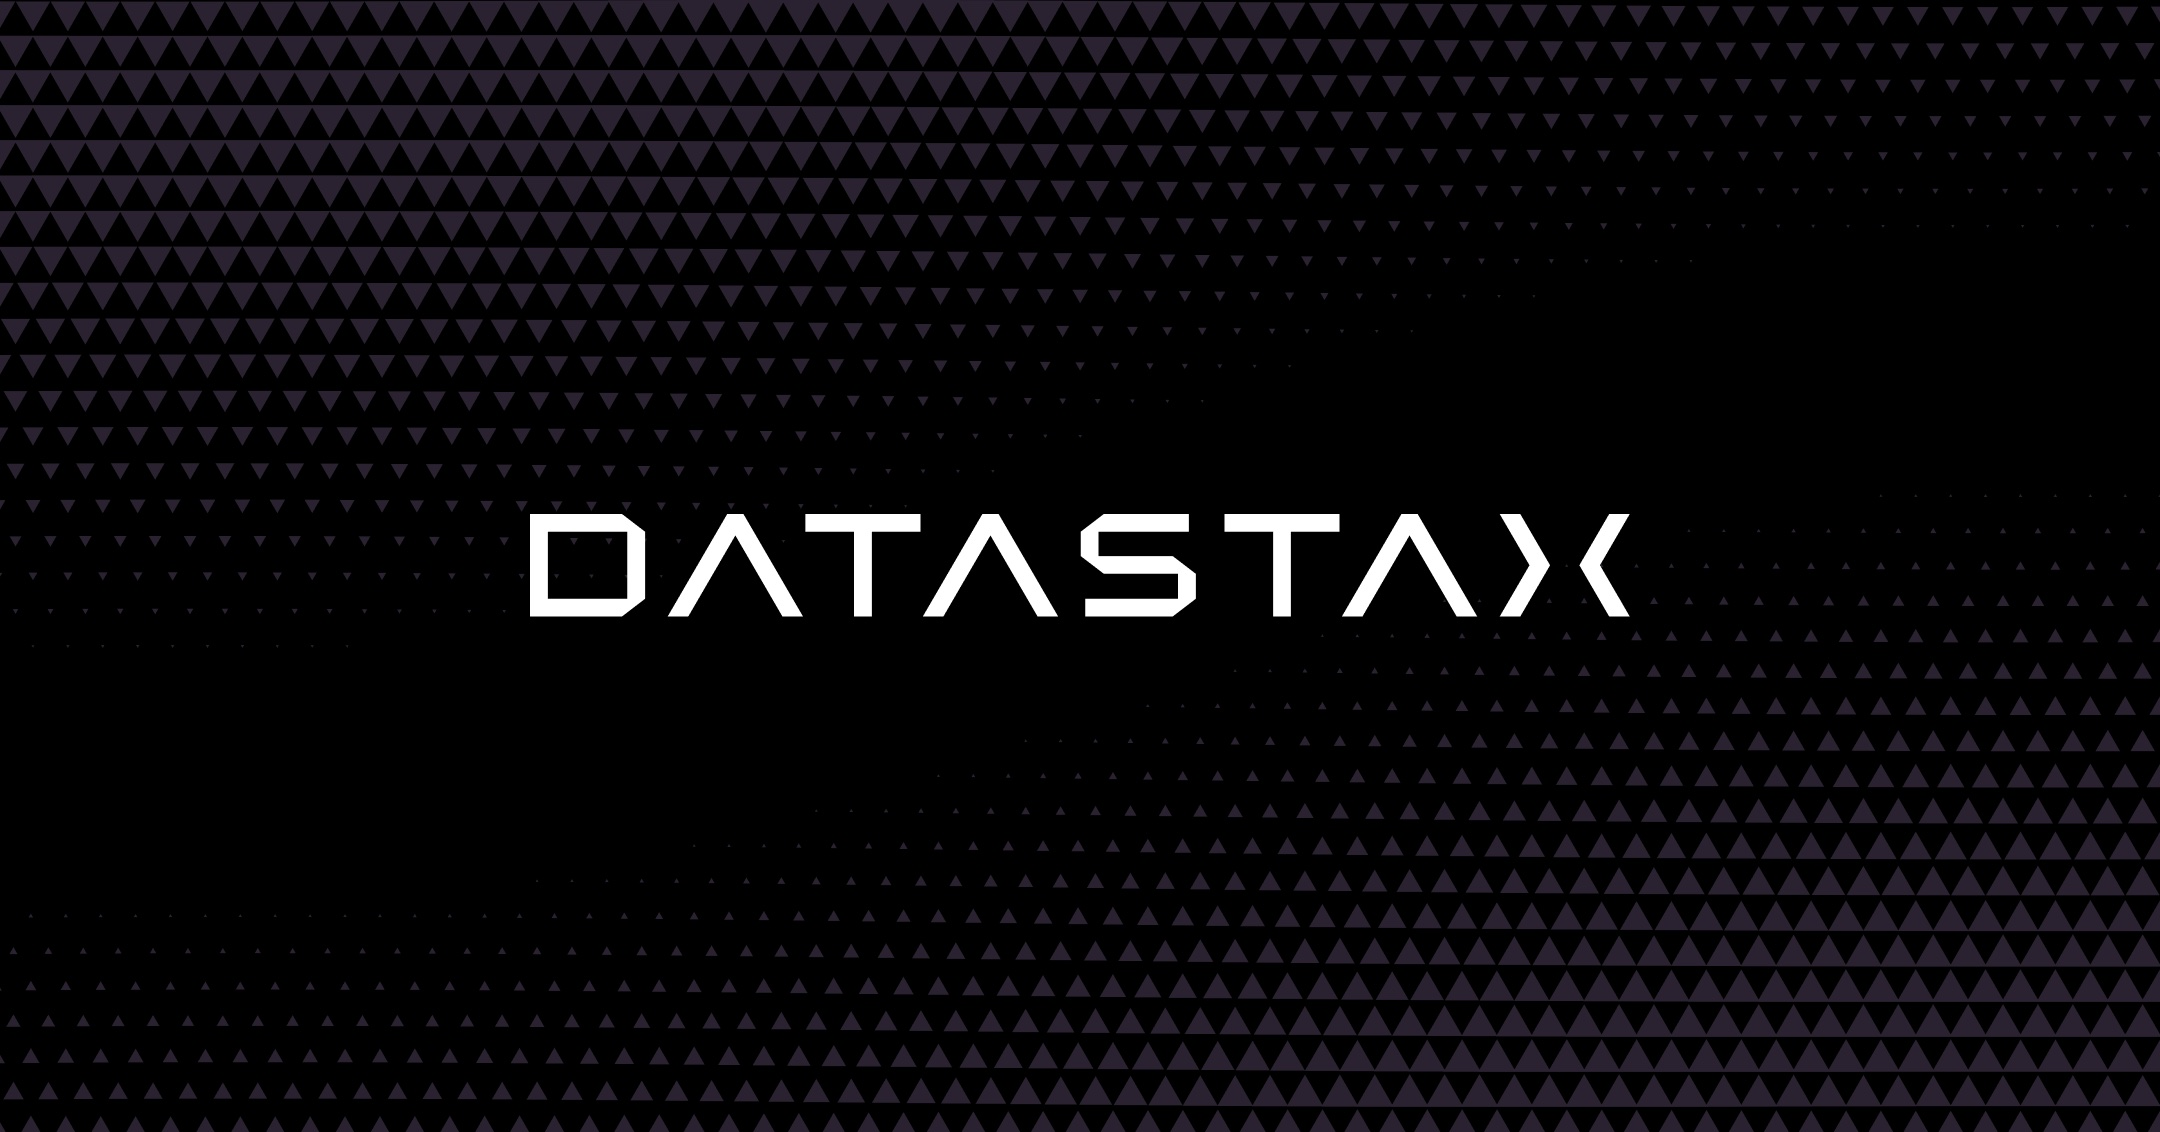 The Journey to Hybrid Cloud with DataStax Enterprise: 5 Keys to Success